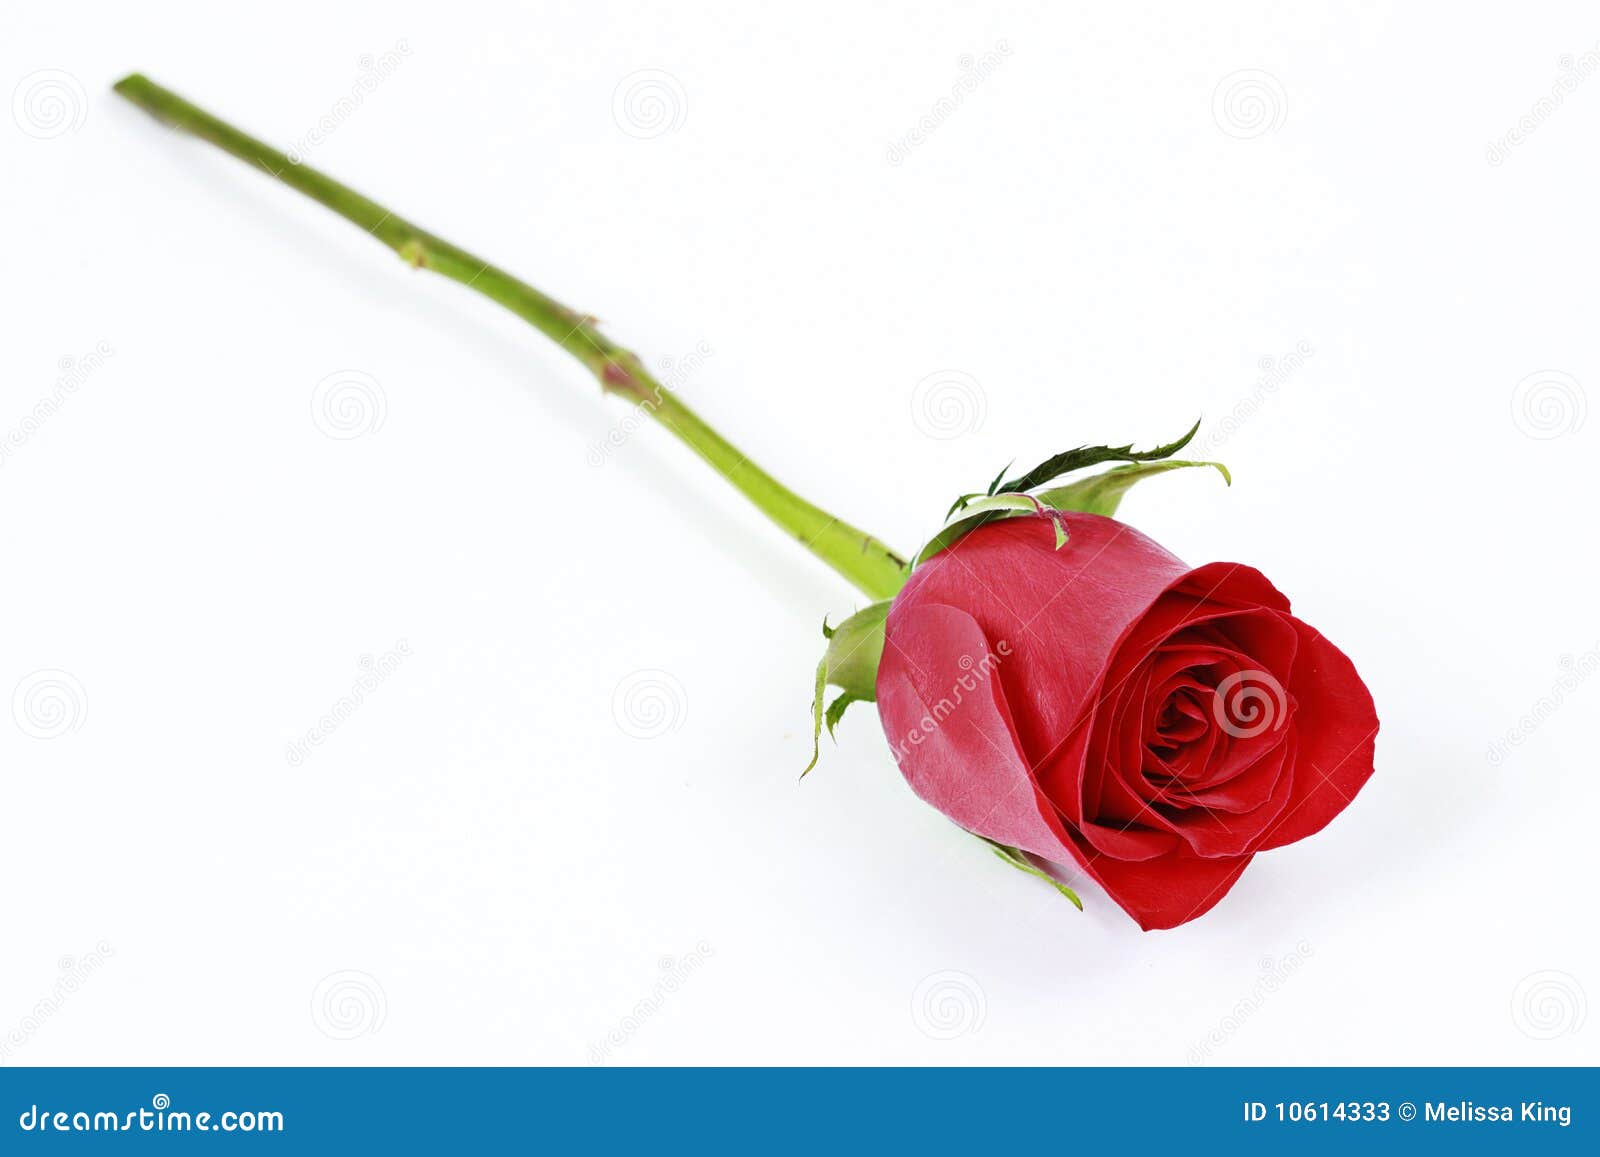 Red Rose With Stem